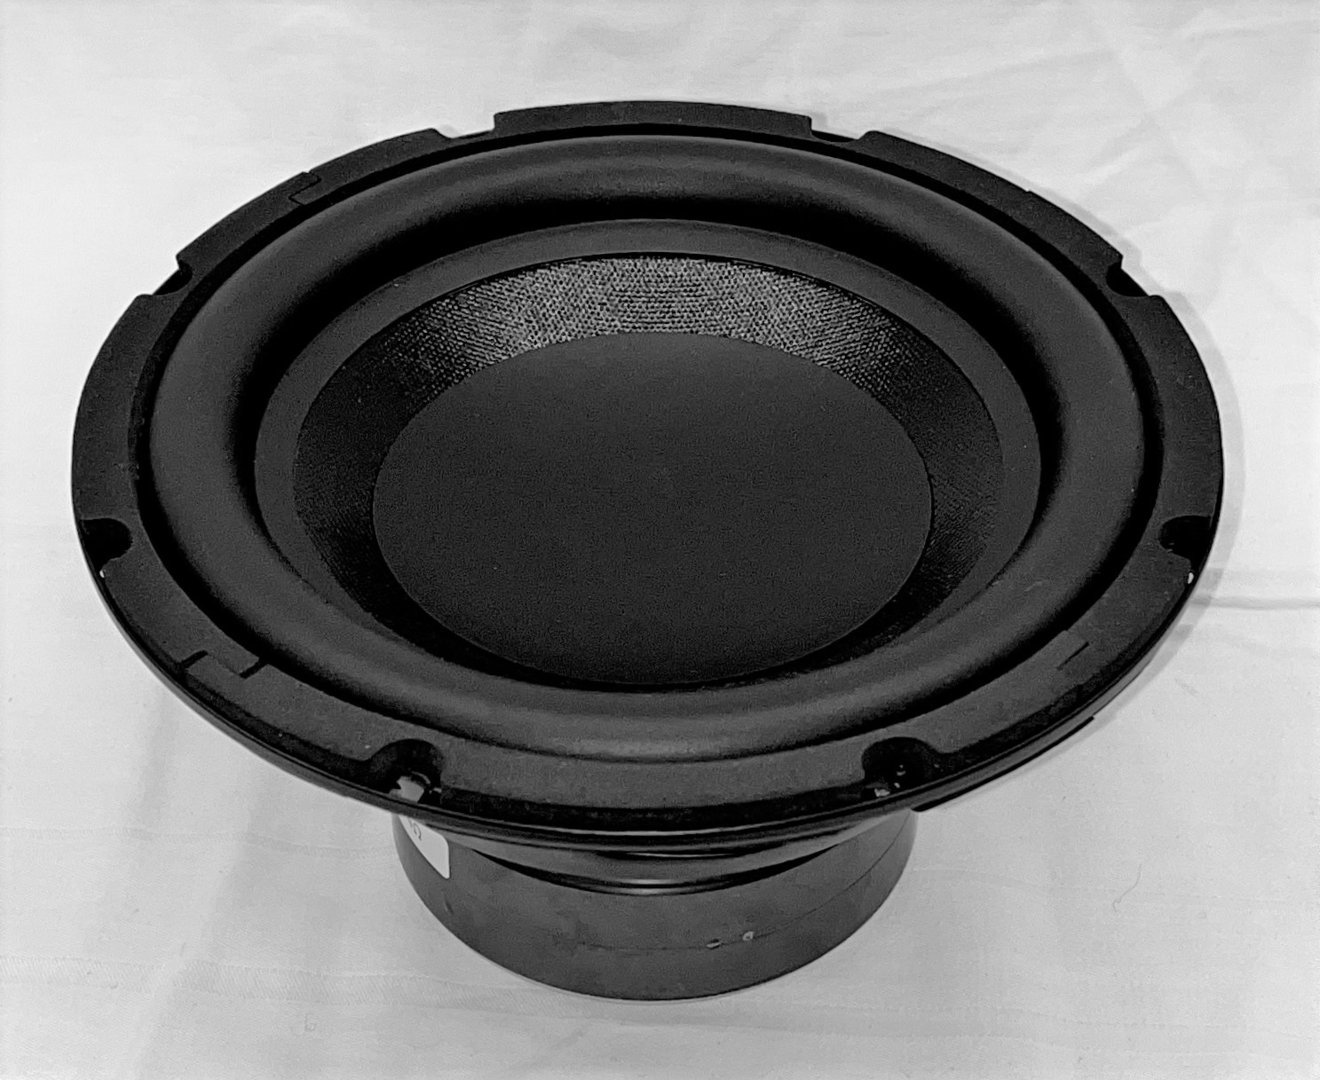 Fortissimo FF8 Subwoofer